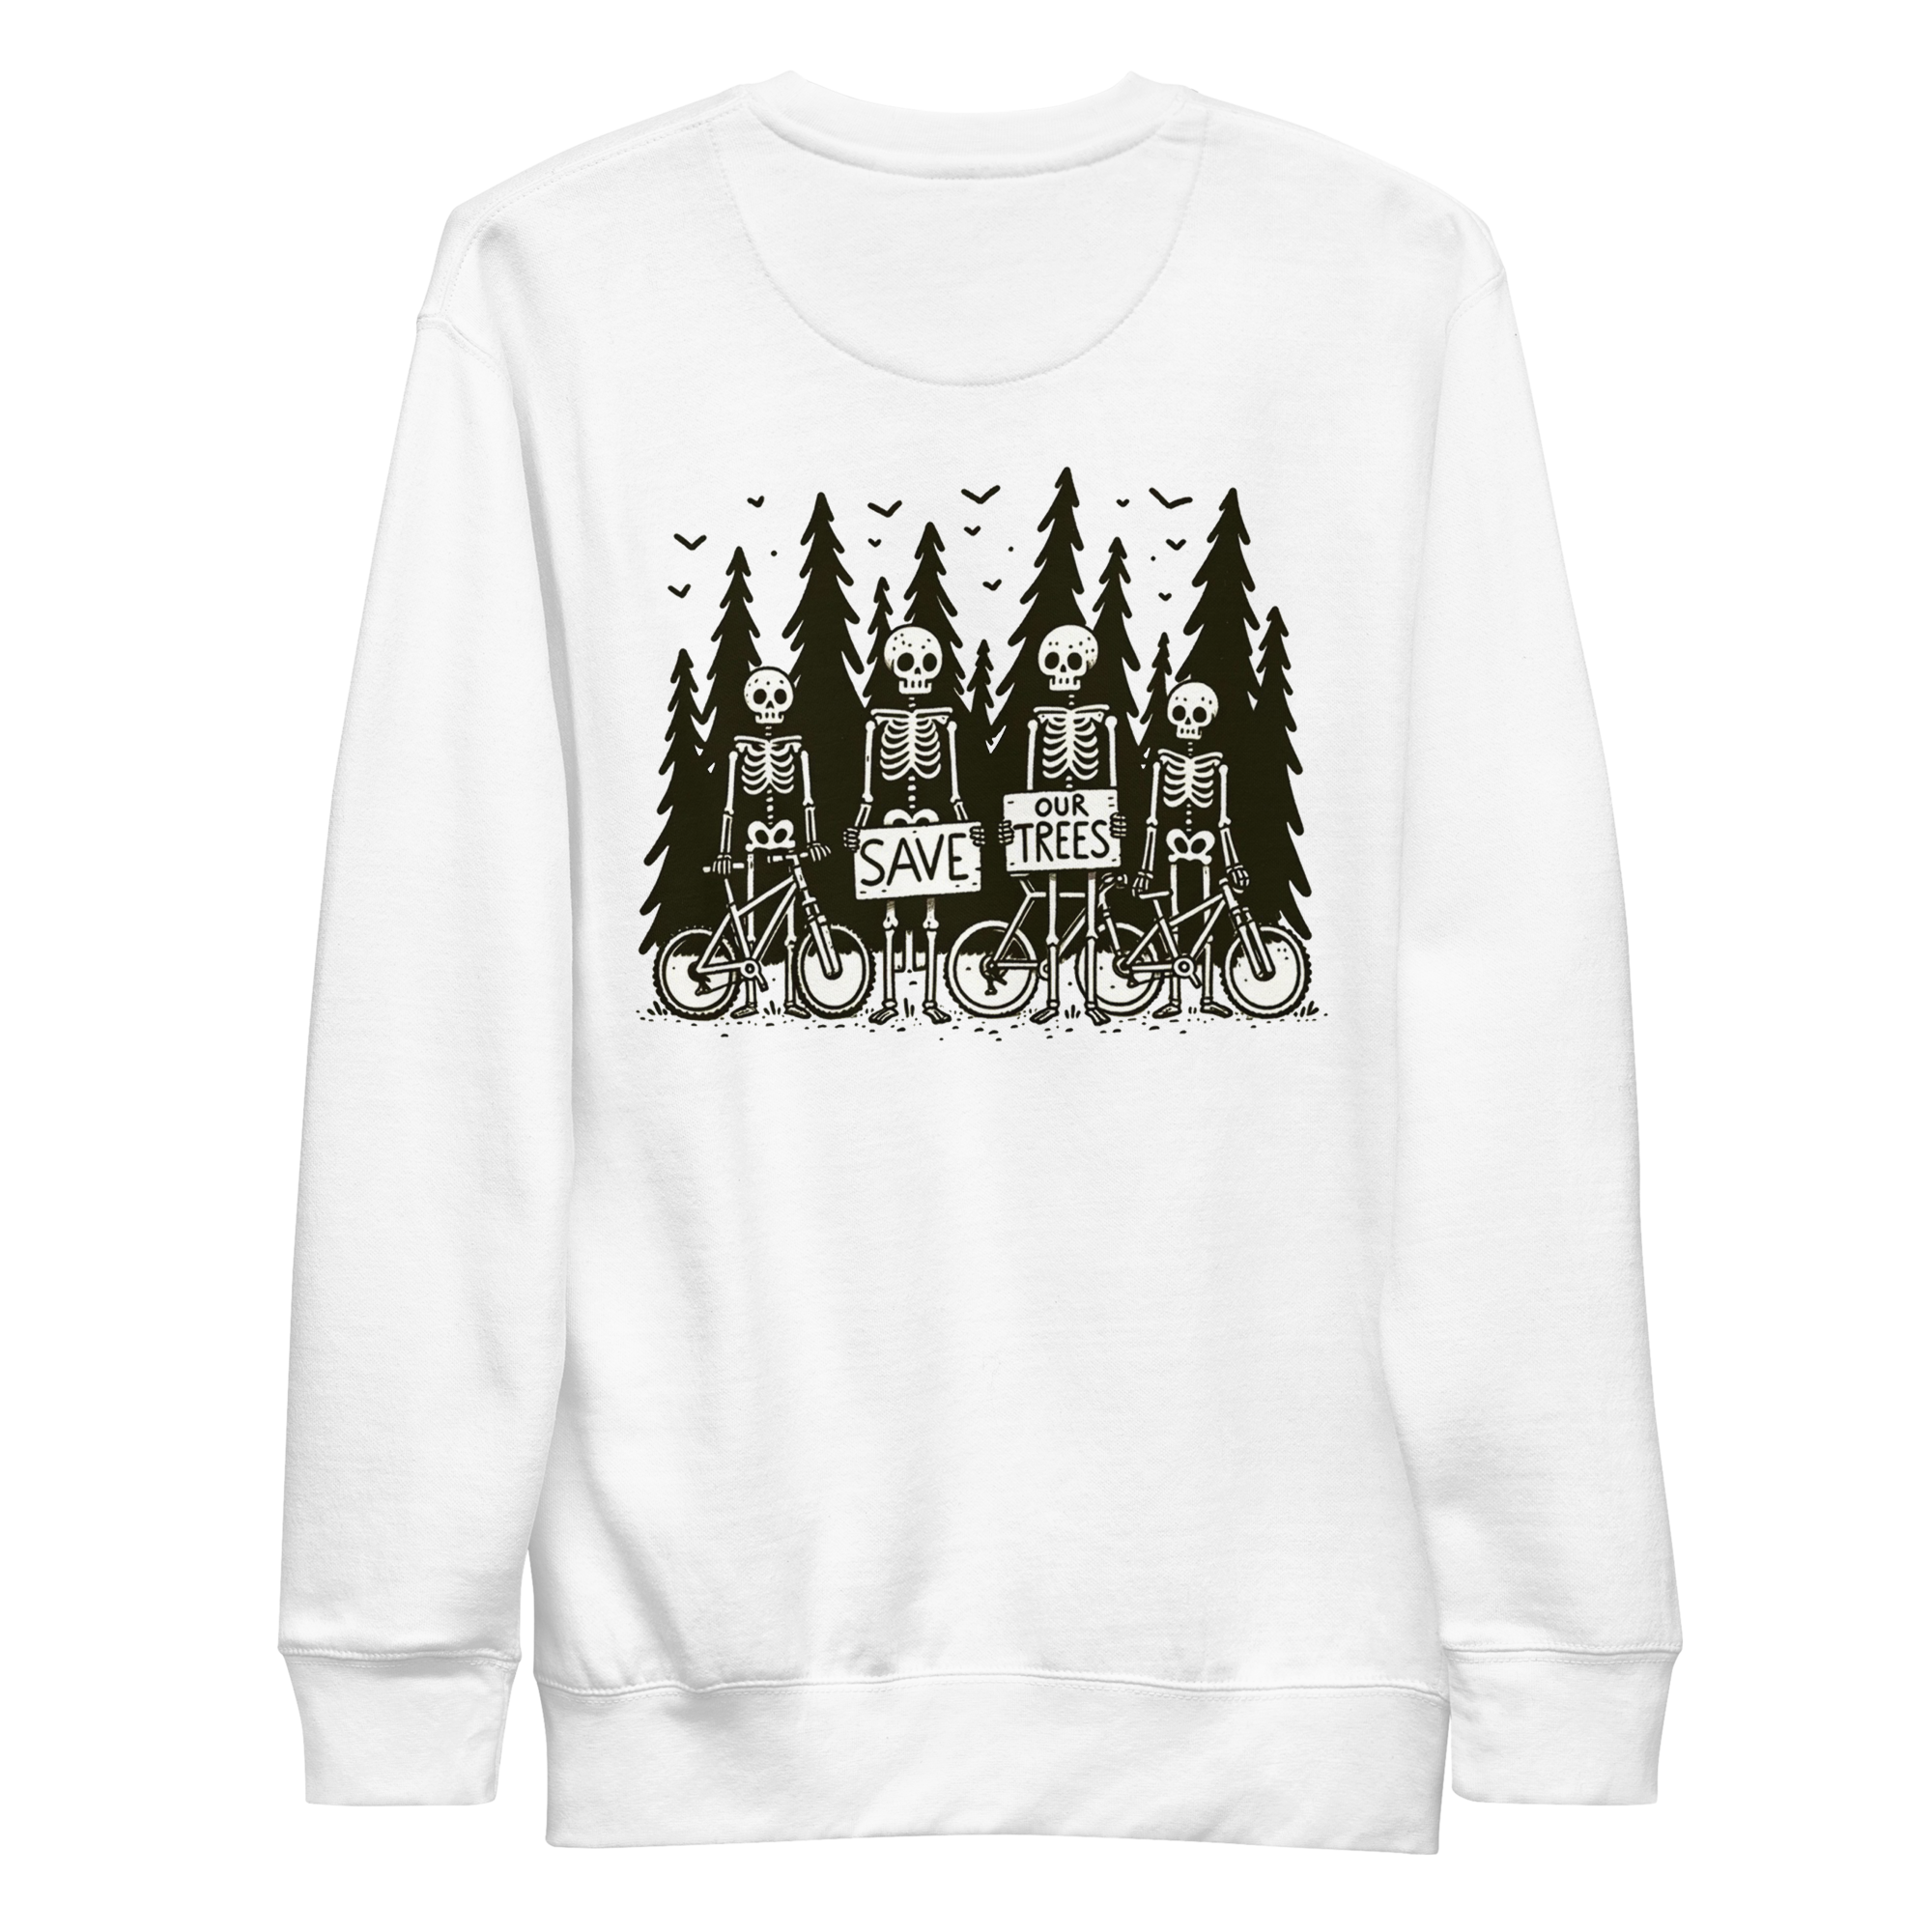 Save our Trees Sweater